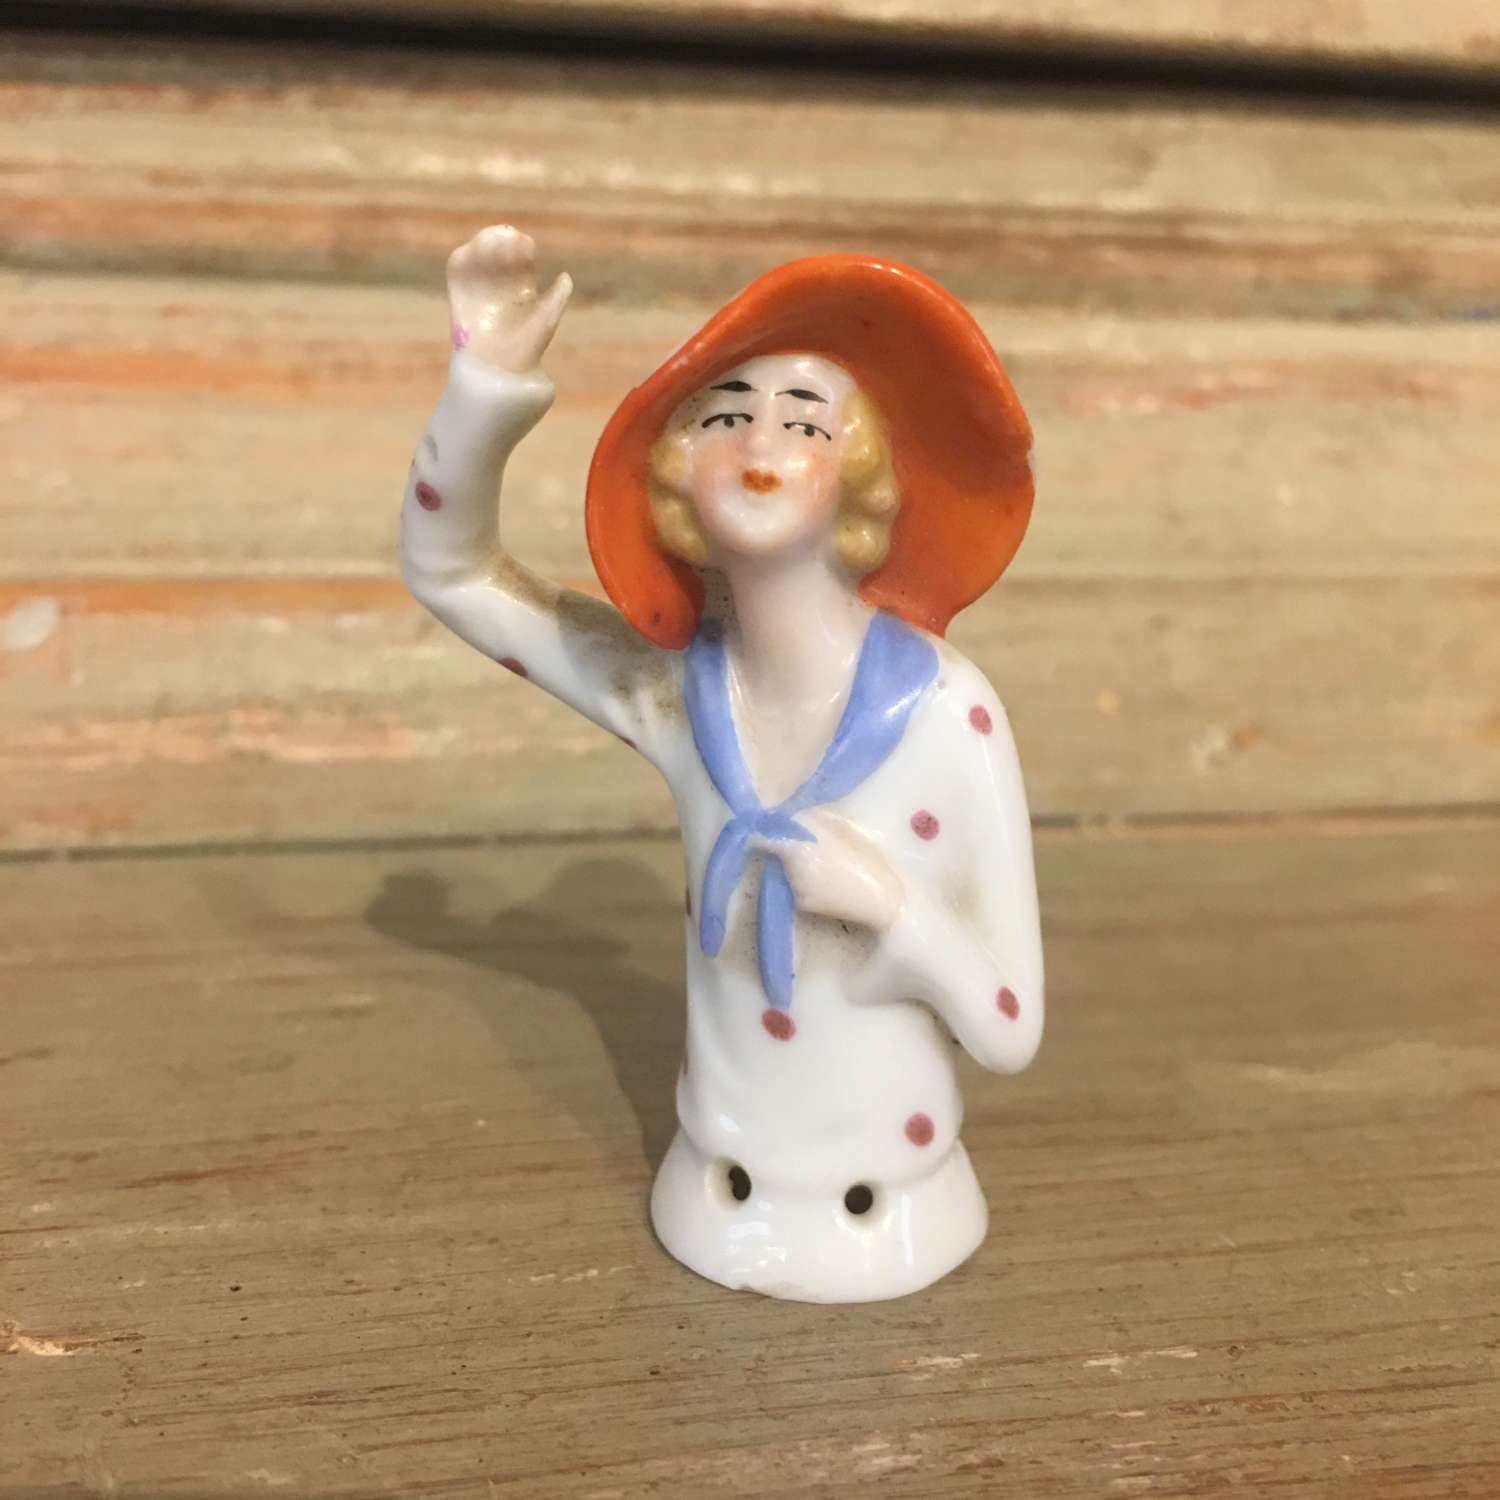 Antique pin dolly bust 1920s